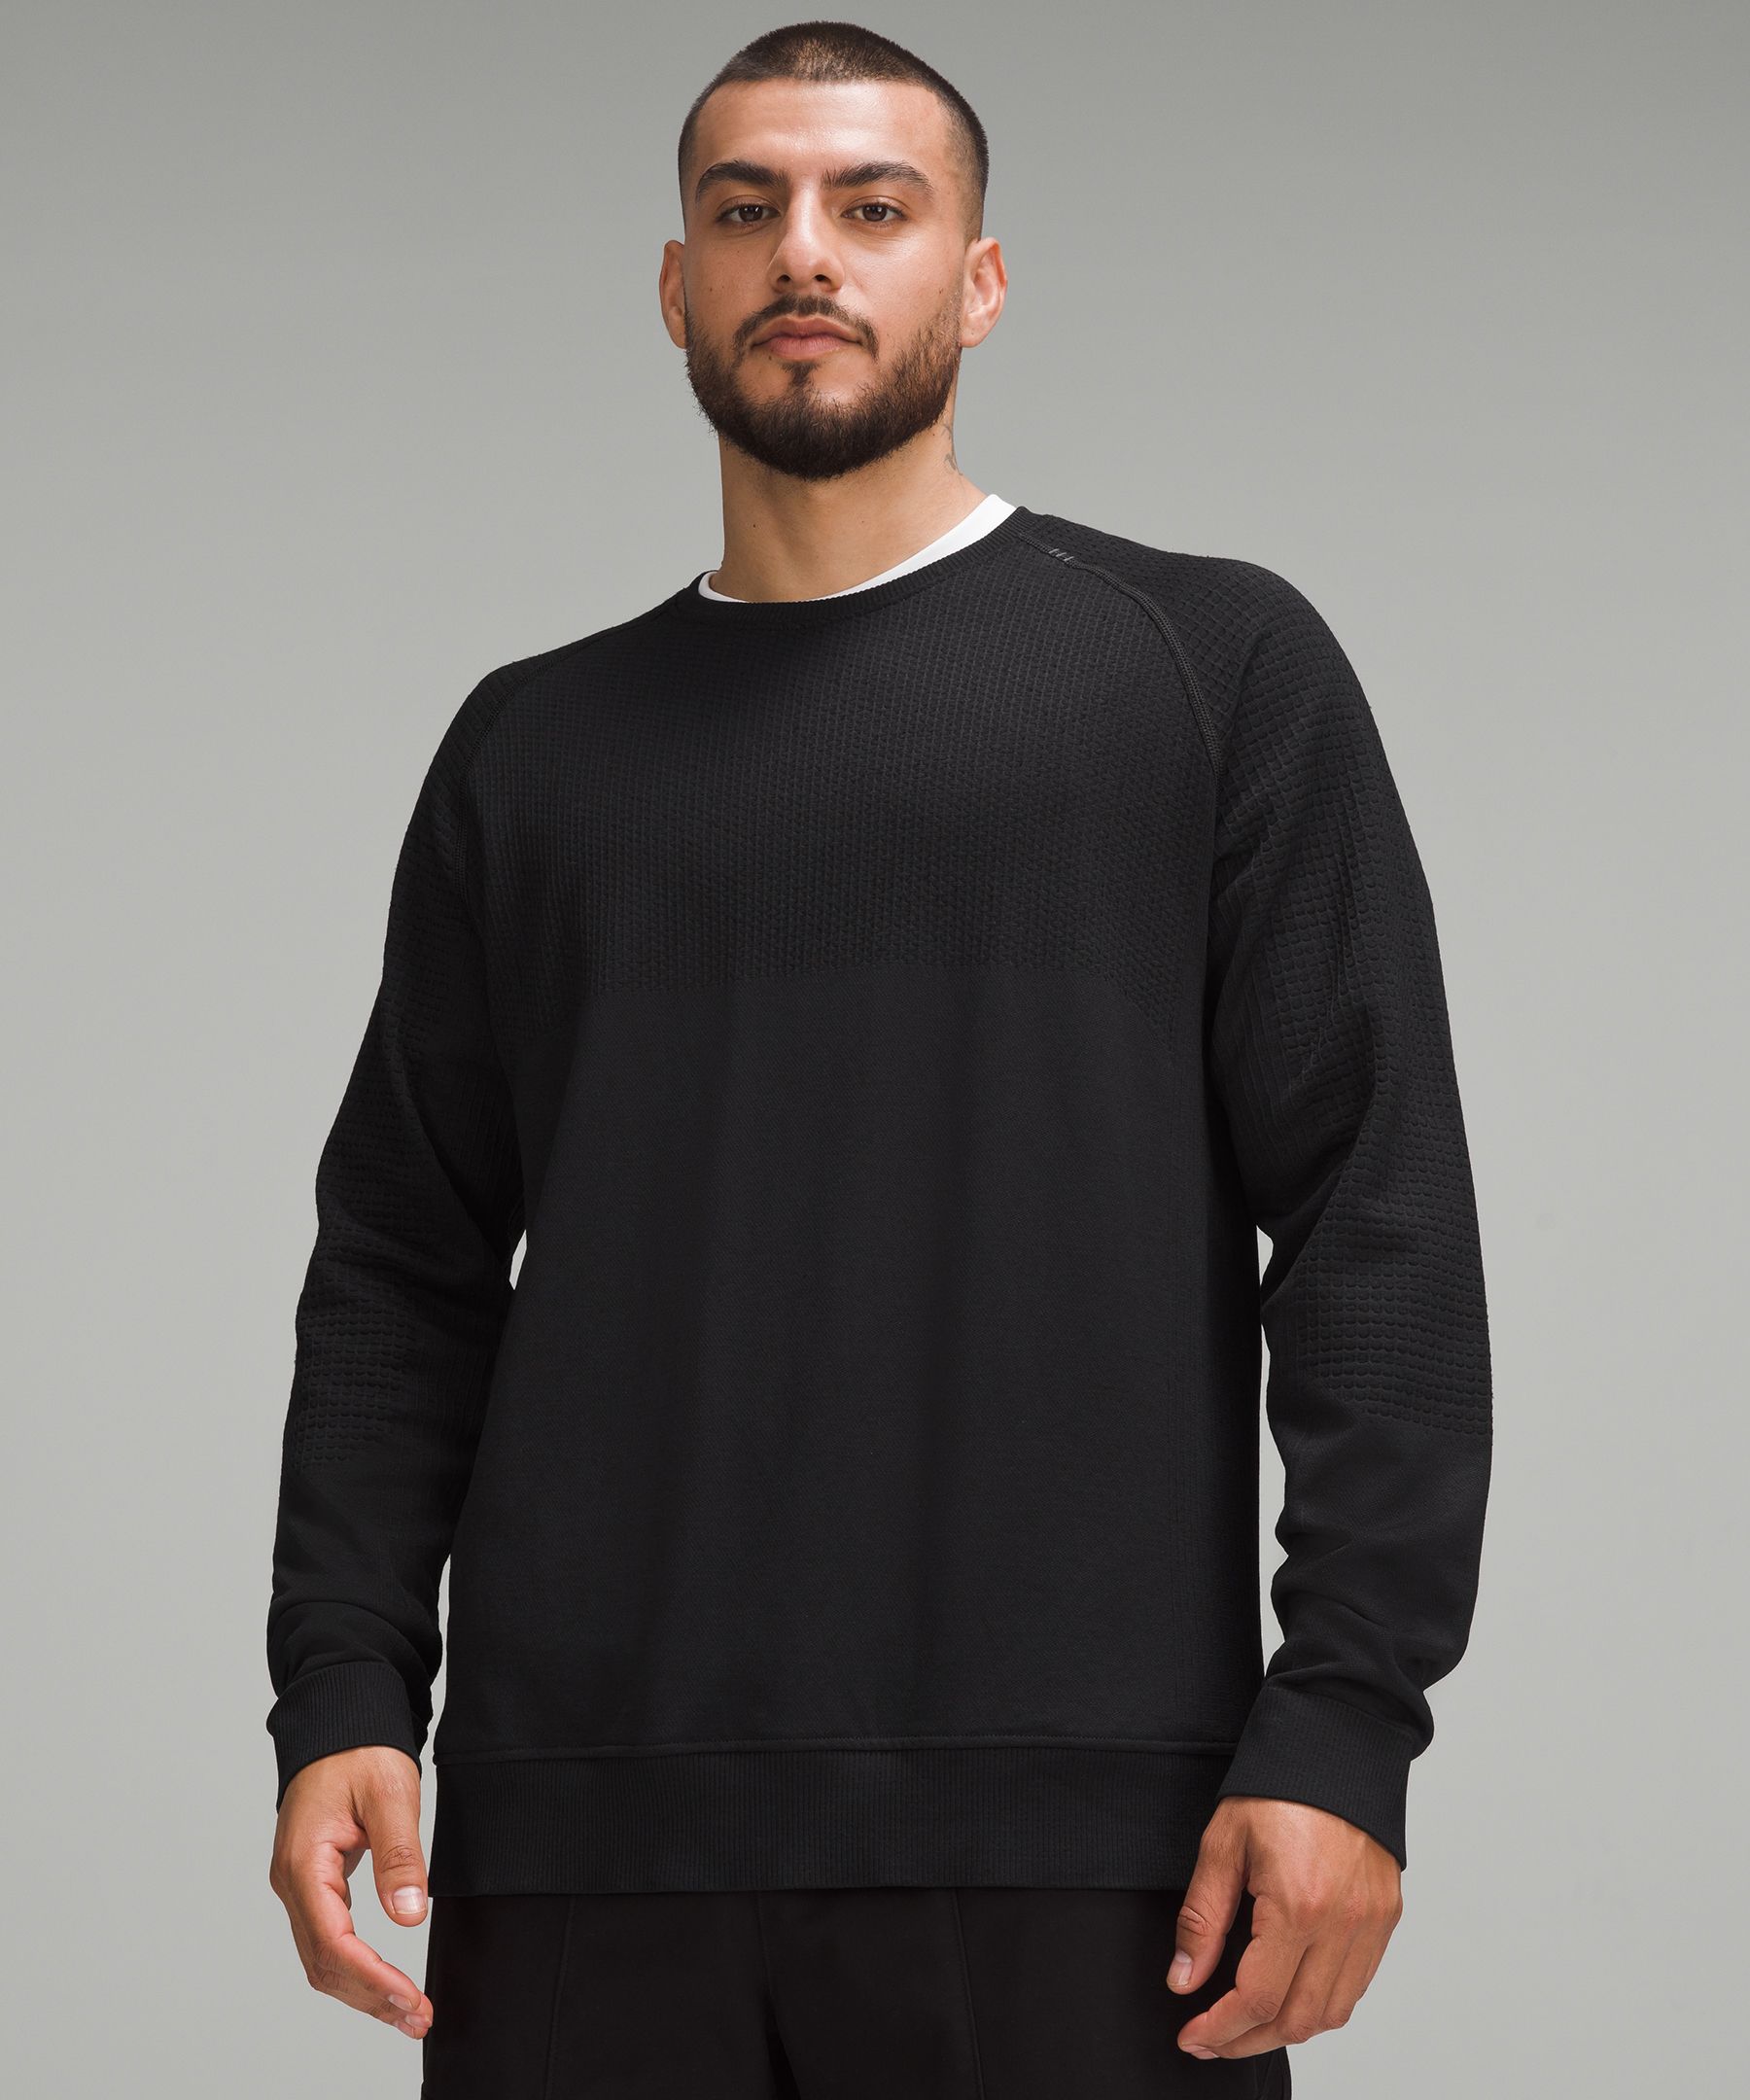 Super extra warmth long-sleeved seamless total look